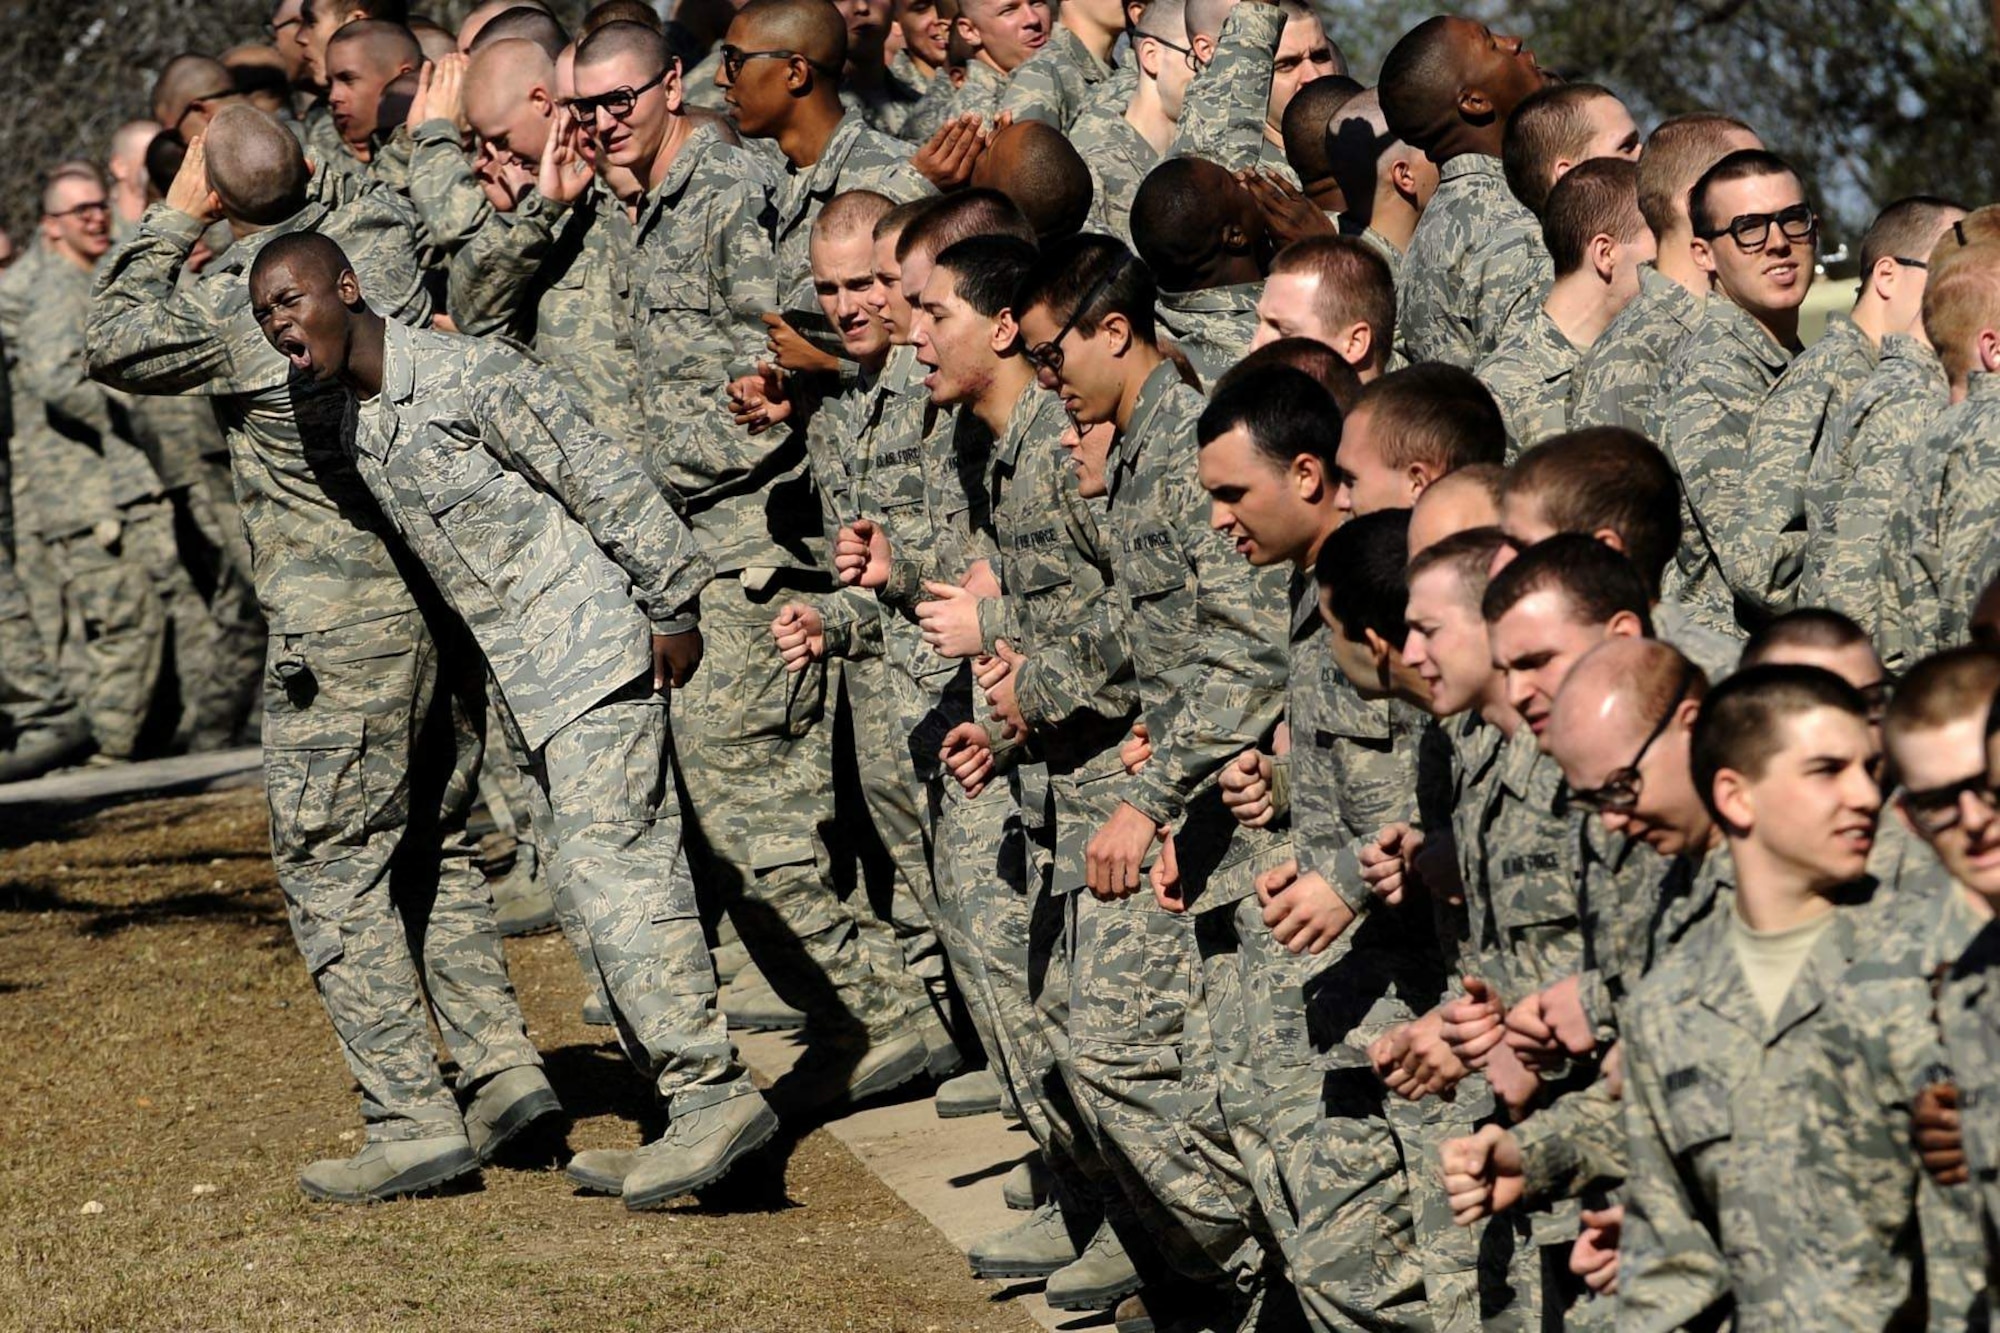 Basic trainees rally themselves with motivational chants while waiting to navigate the obstacle course at Lackland Air Force Base, Texas.  (U.S. Air Force photo/Master Sgt. Cecilio Ricardo)
